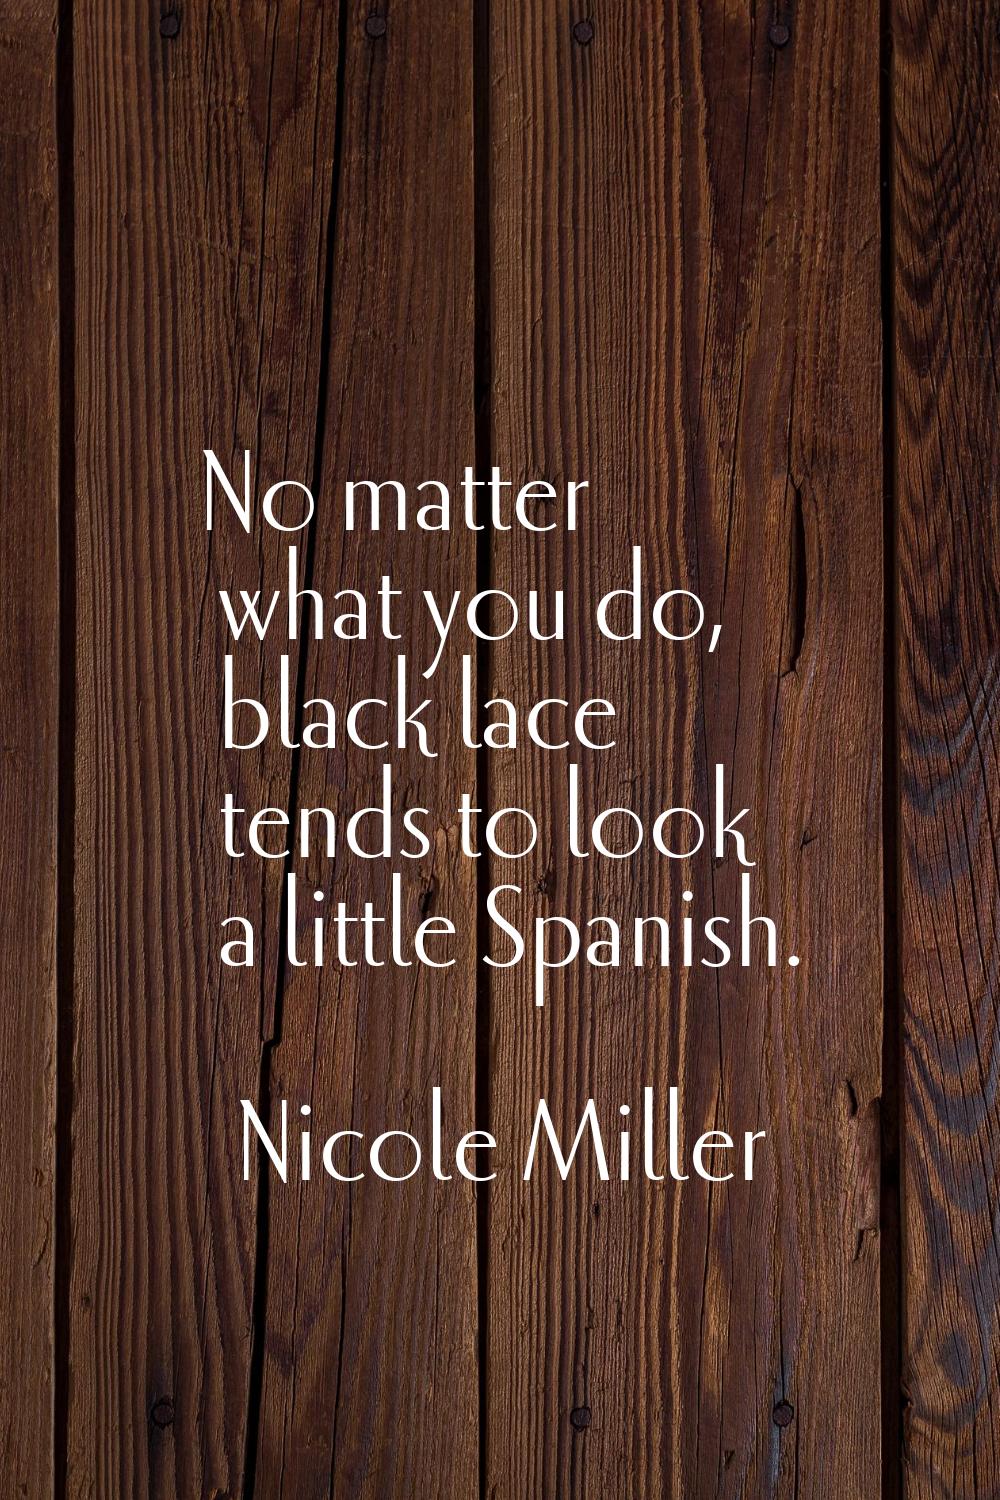 No matter what you do, black lace tends to look a little Spanish.